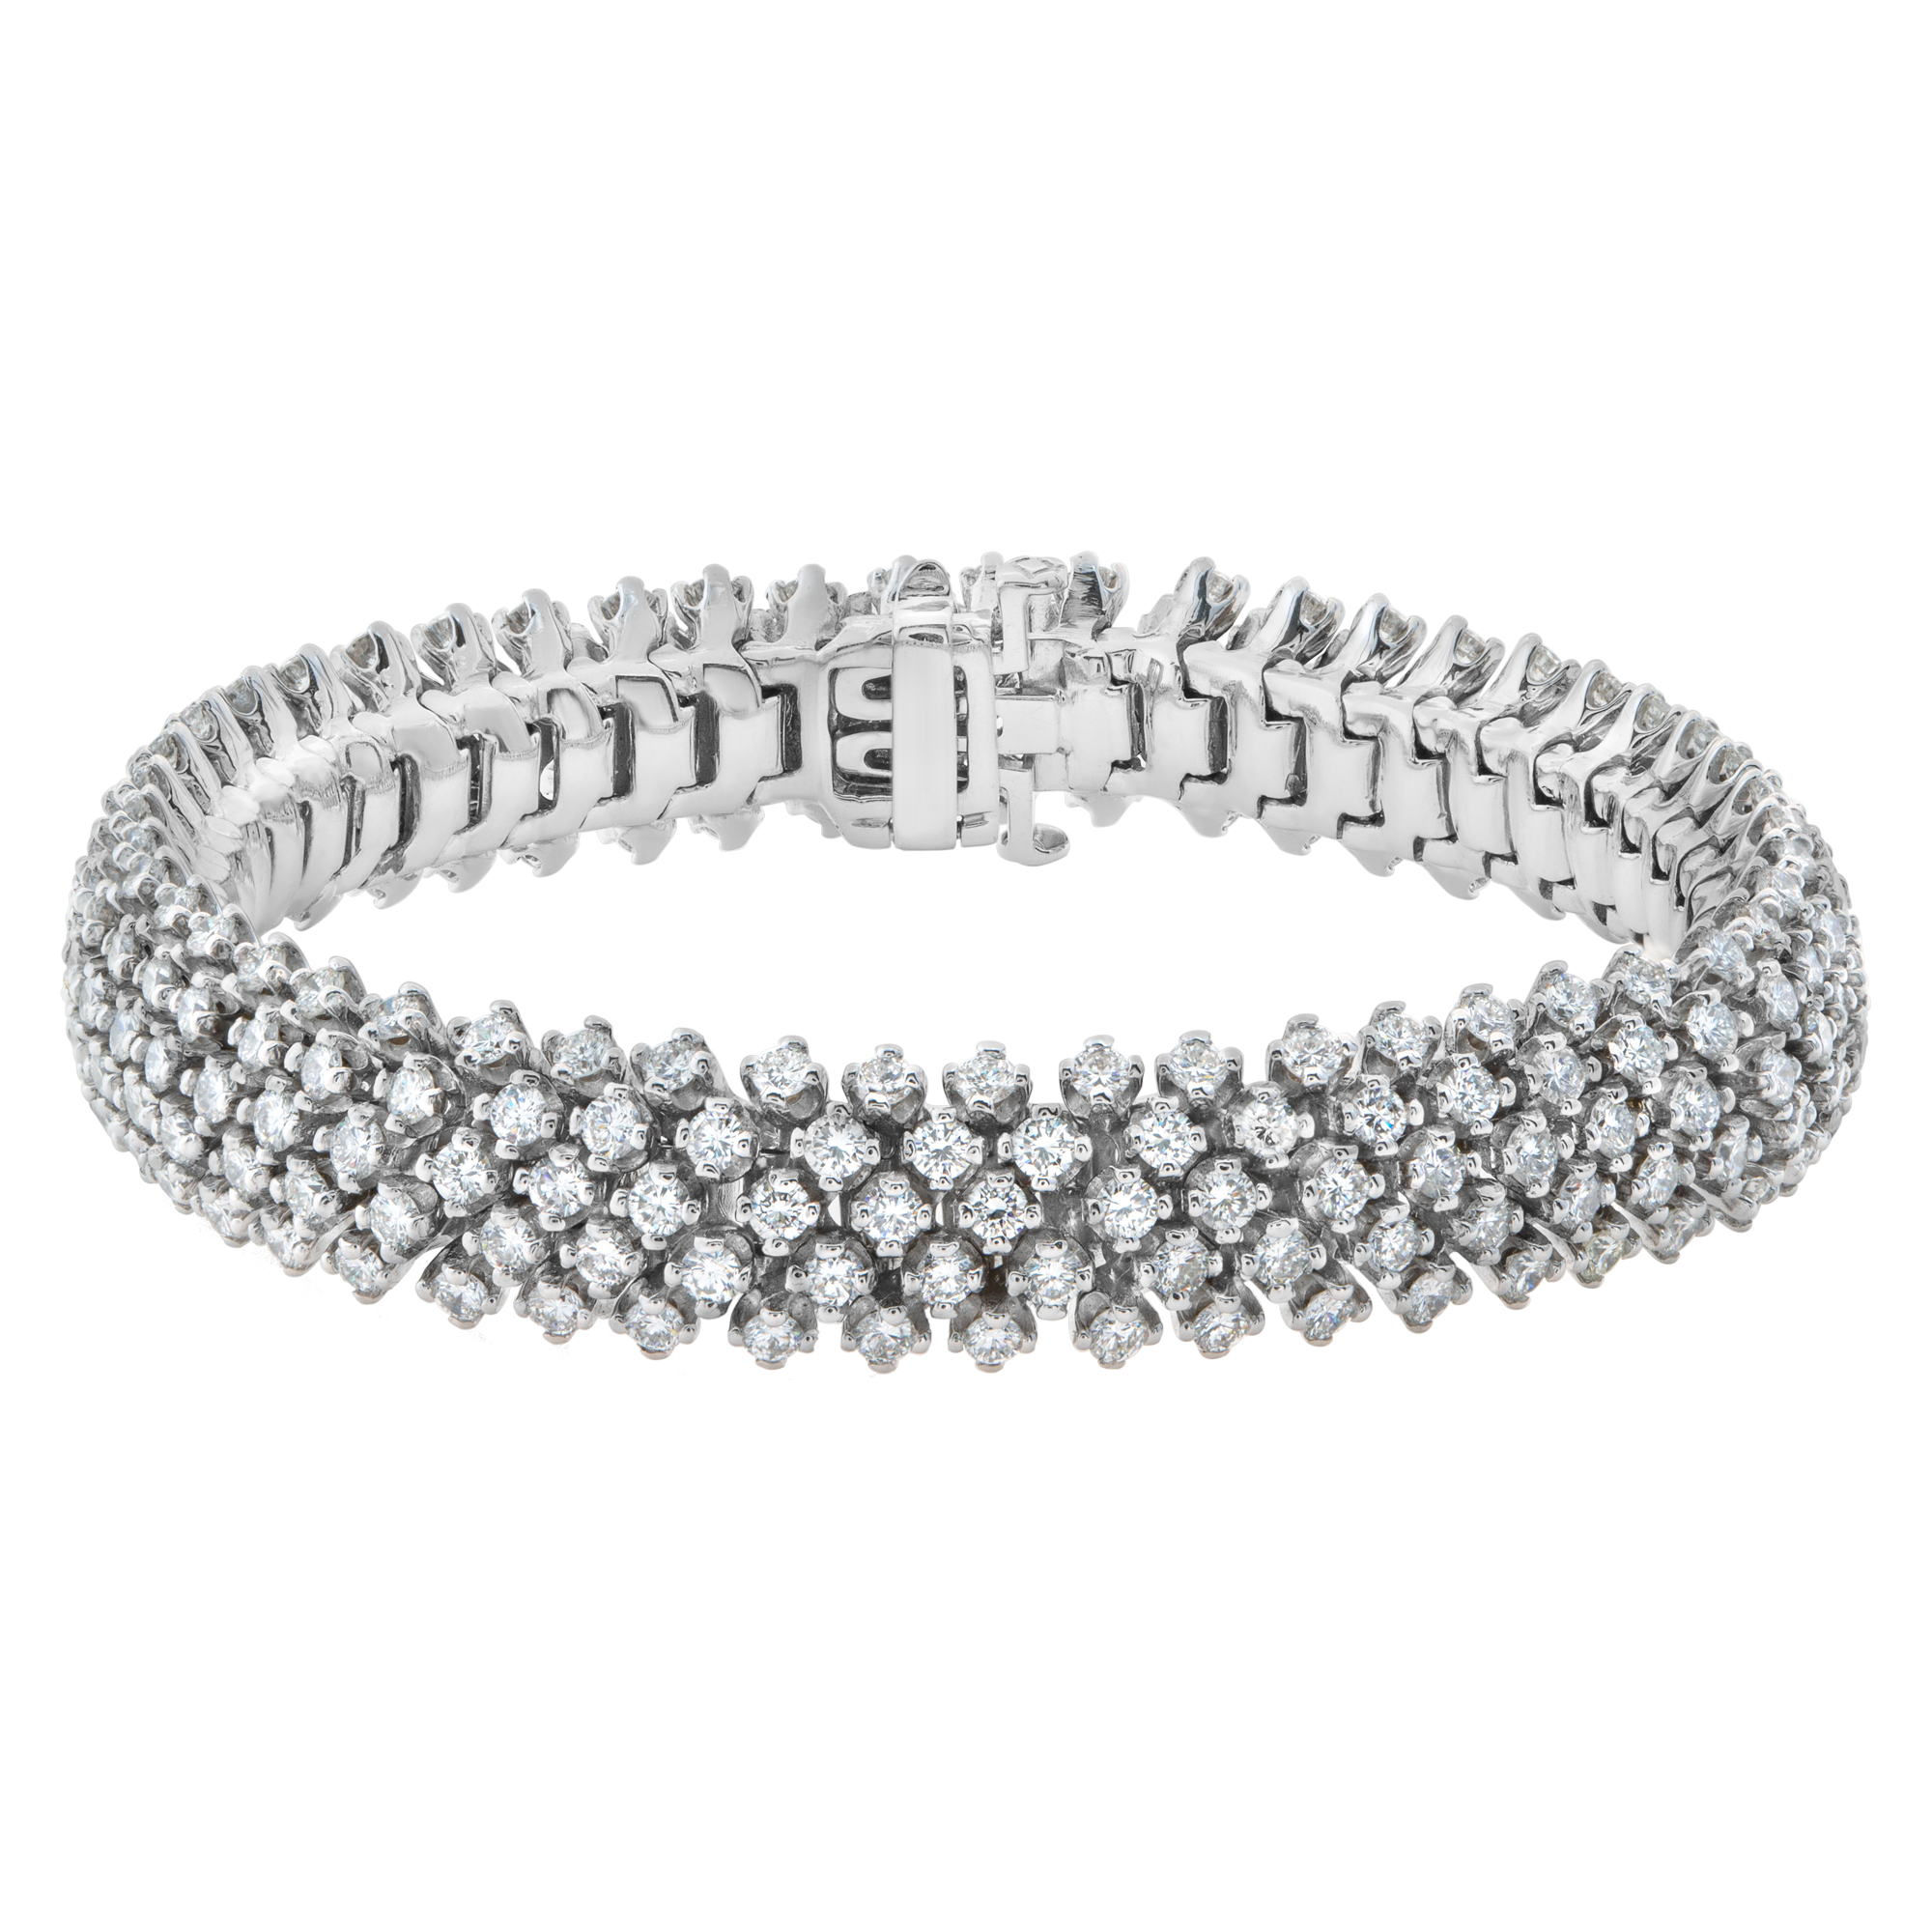 Stunning 5 rows diamond line bracelet in 18k white gold. Over 9 carats- image 1